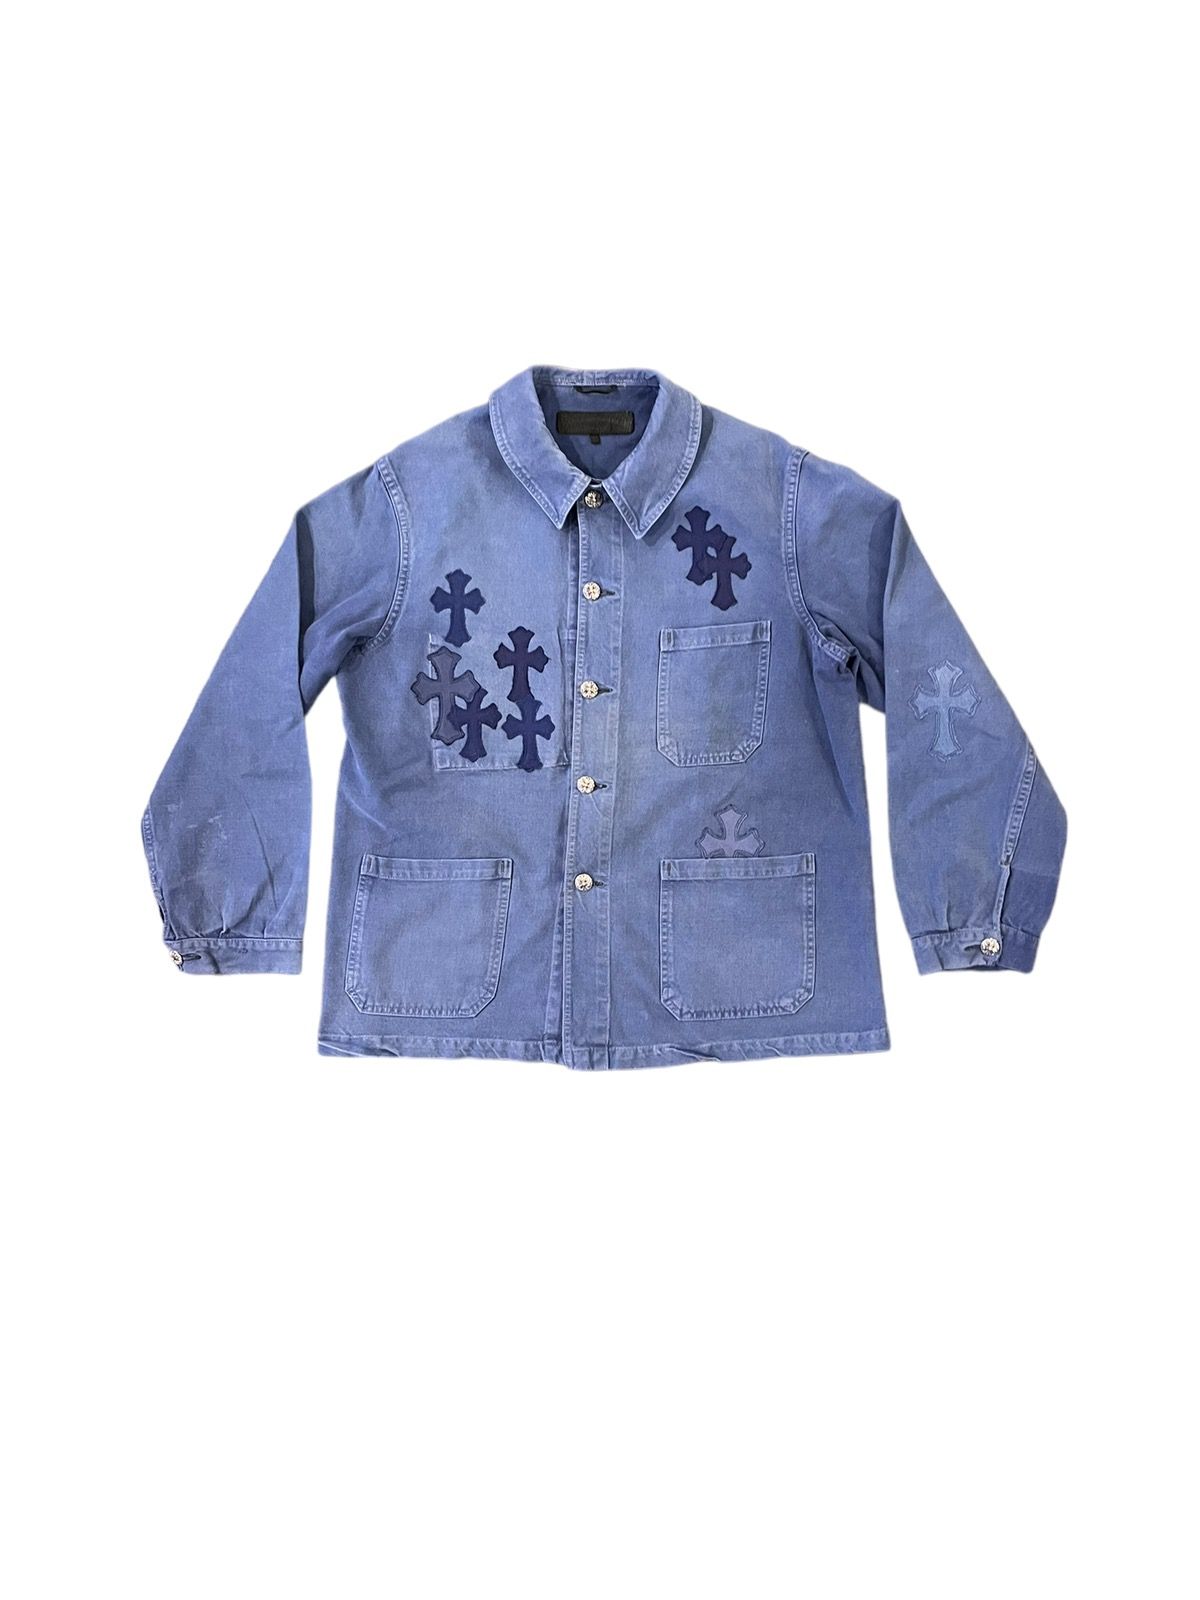 Pre-owned Chrome Hearts Cross Patch Vintage French Bleu Work Shirt